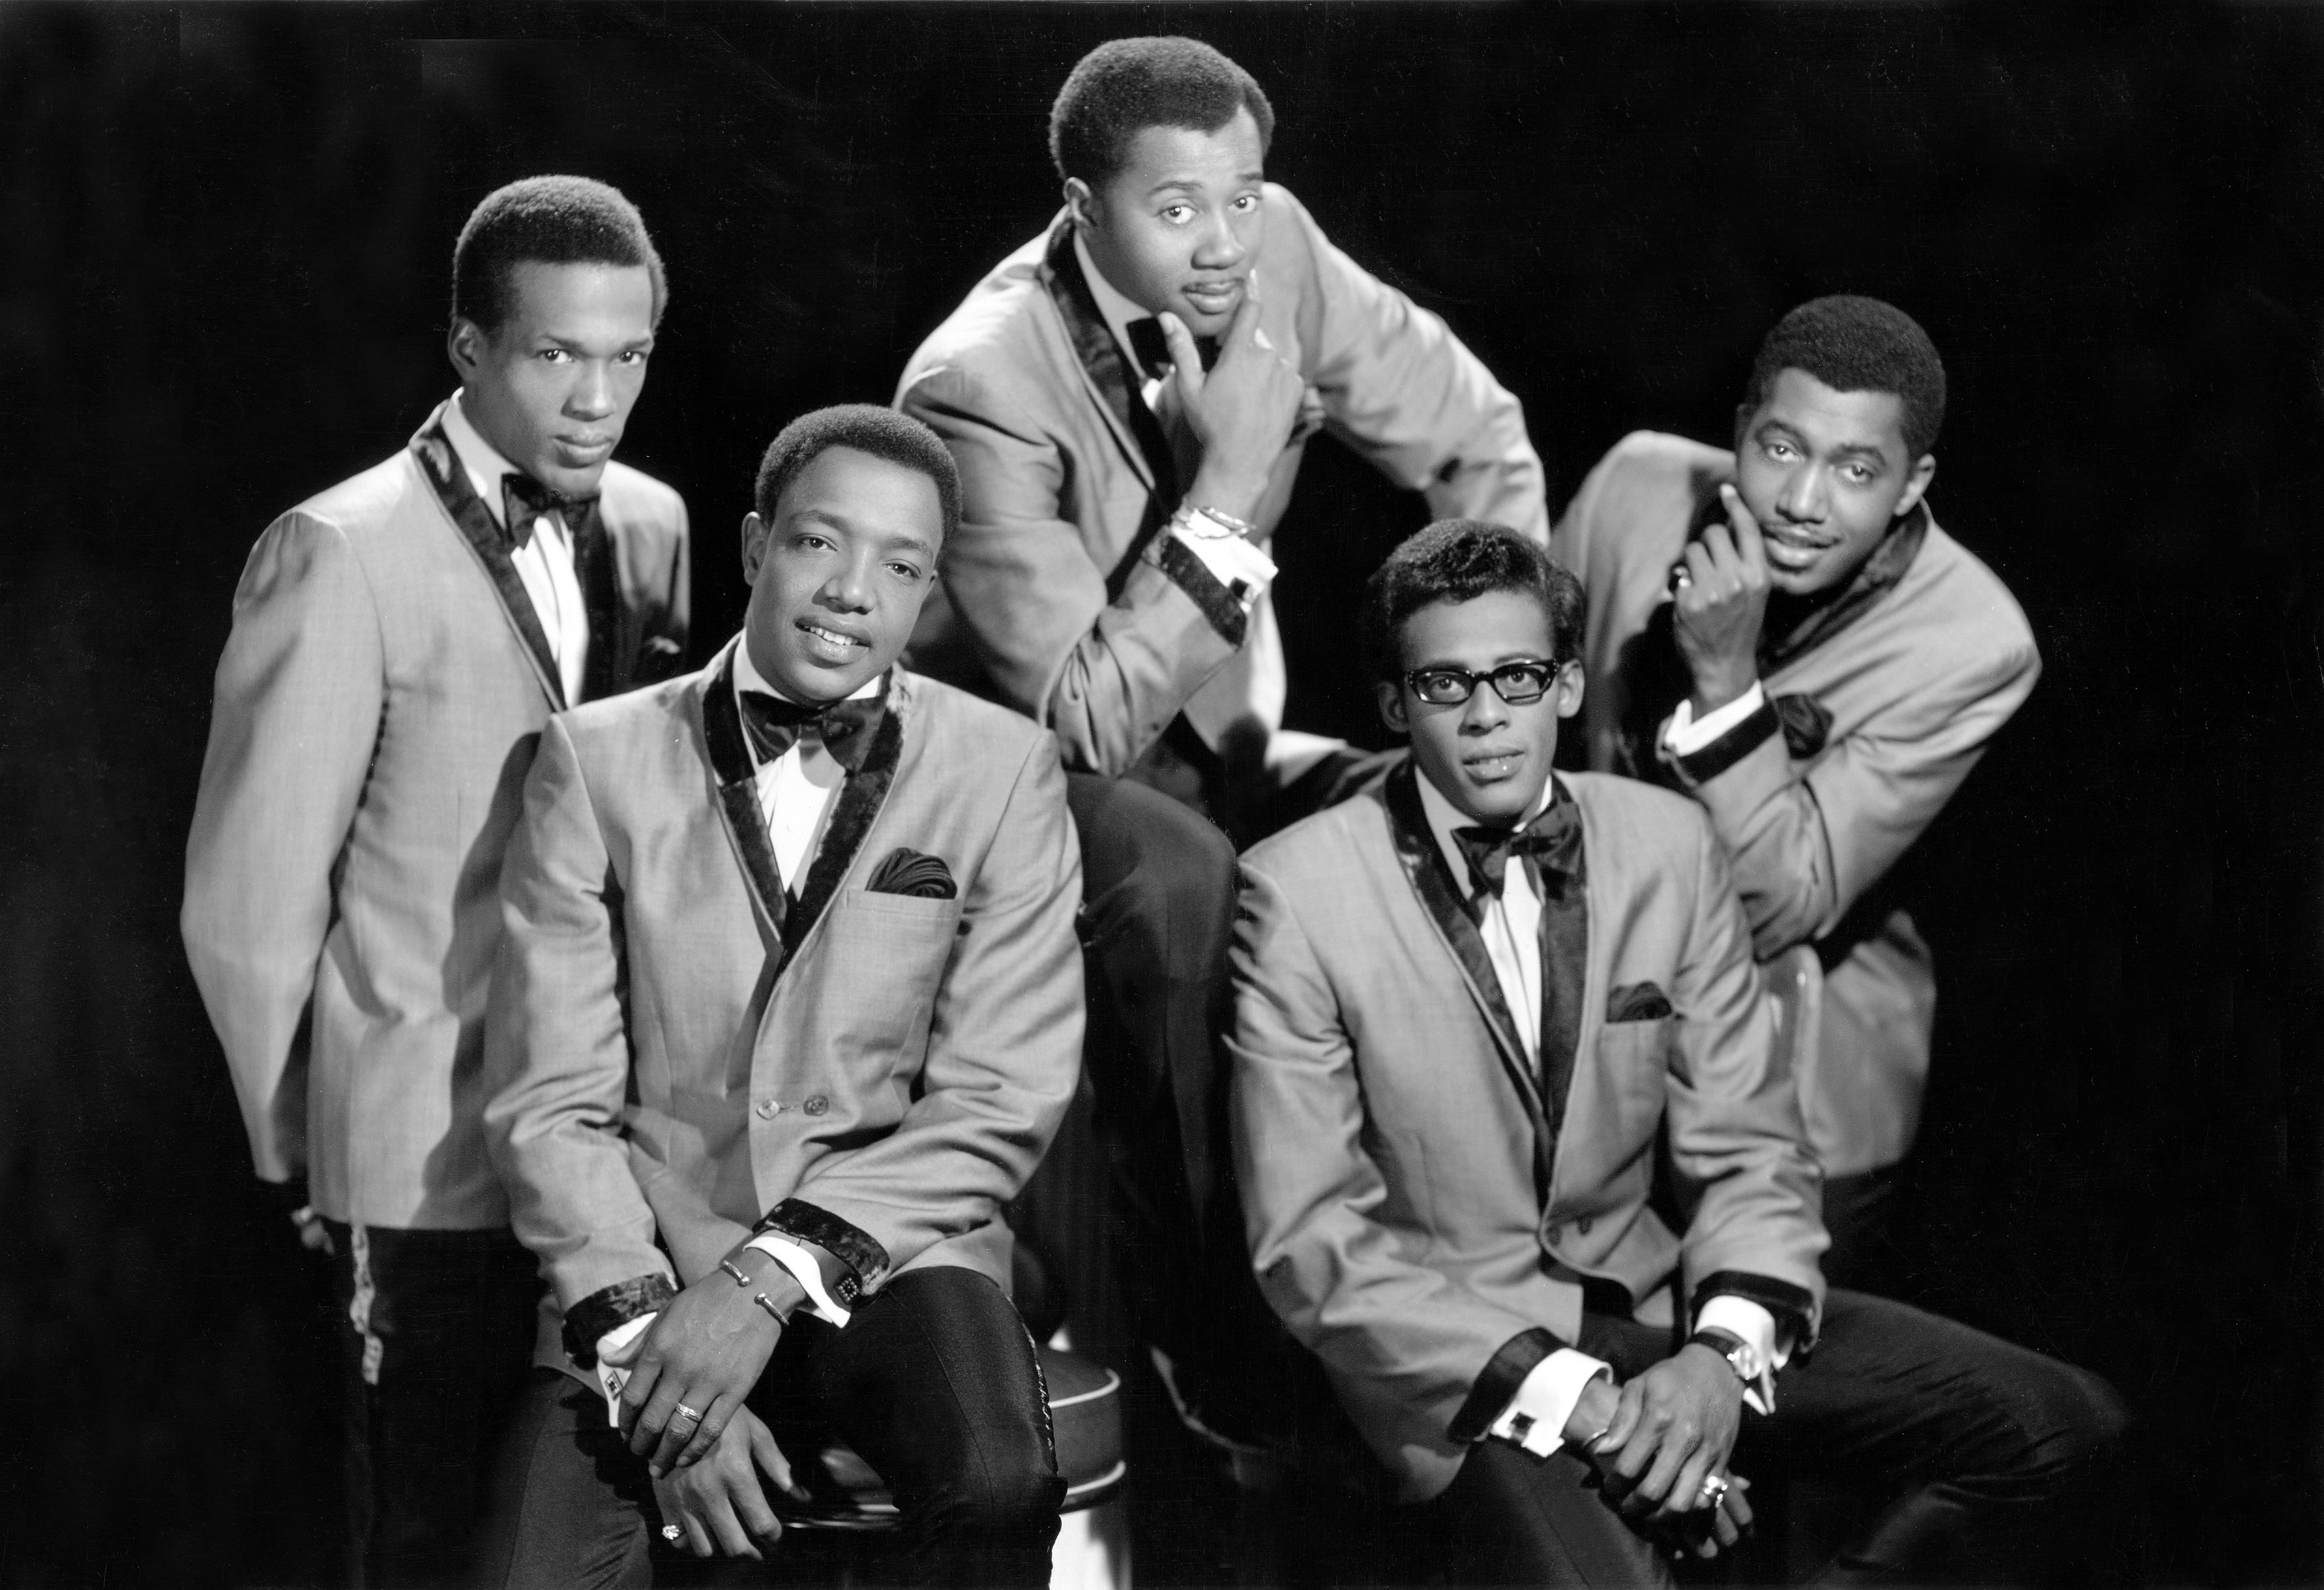 The Temptations wearing suits